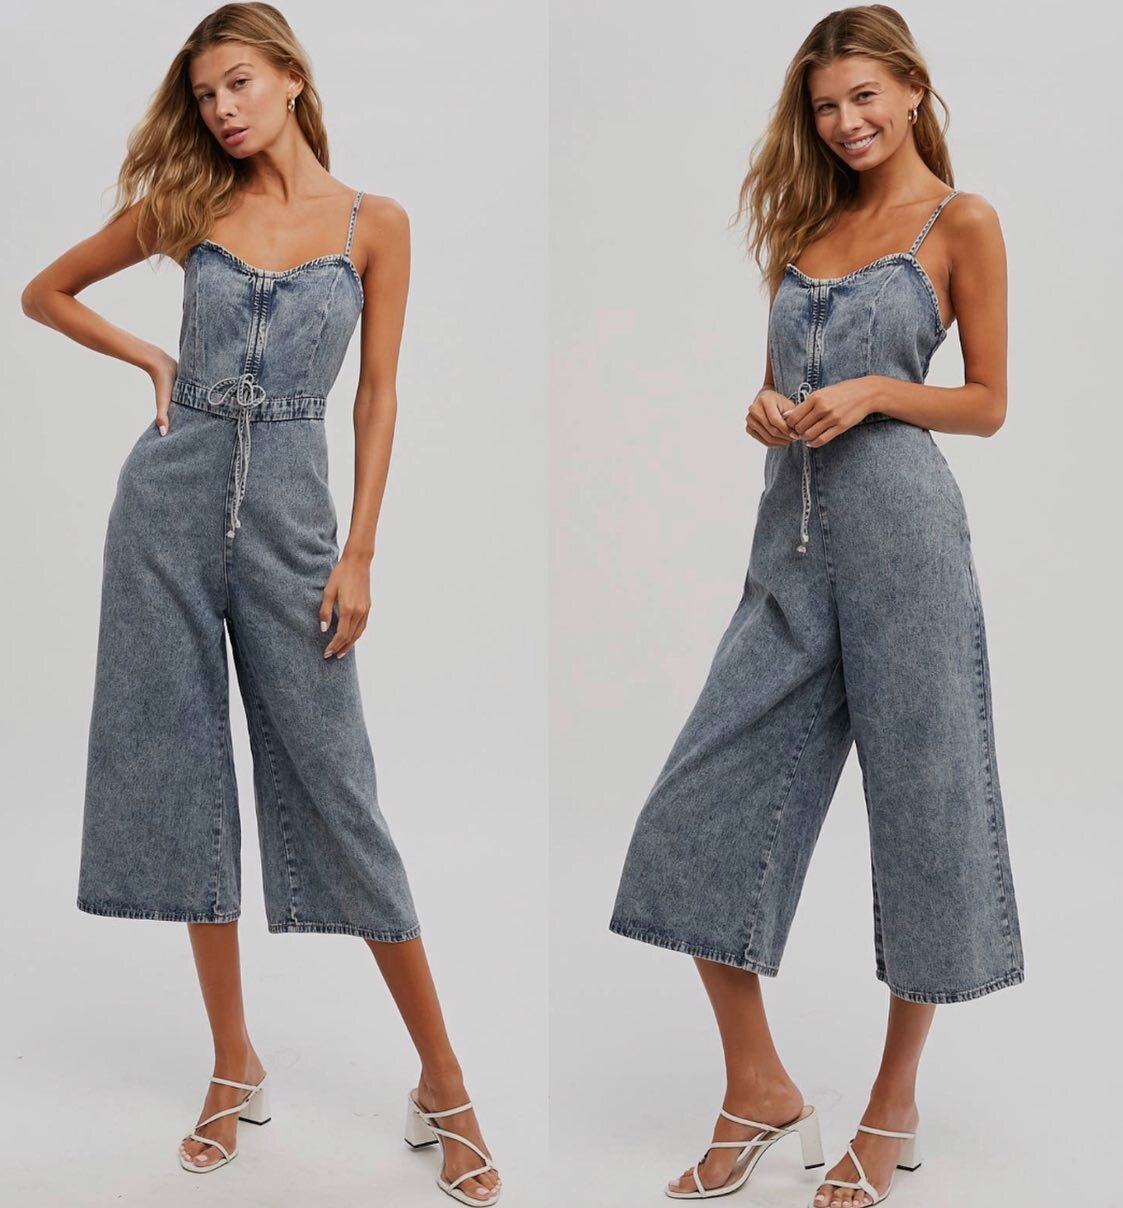 New in this week! 
:
Summer meets denim! Does it get any better!?! 
:
😎☀️
:
#open #fashion #comfy #treatyourself #treats #boots #selfcare #selflove #boutique #naturalbeauty #womenownedbusiness #girlpower #workingmom #proud #levelup #pnw #newport #or